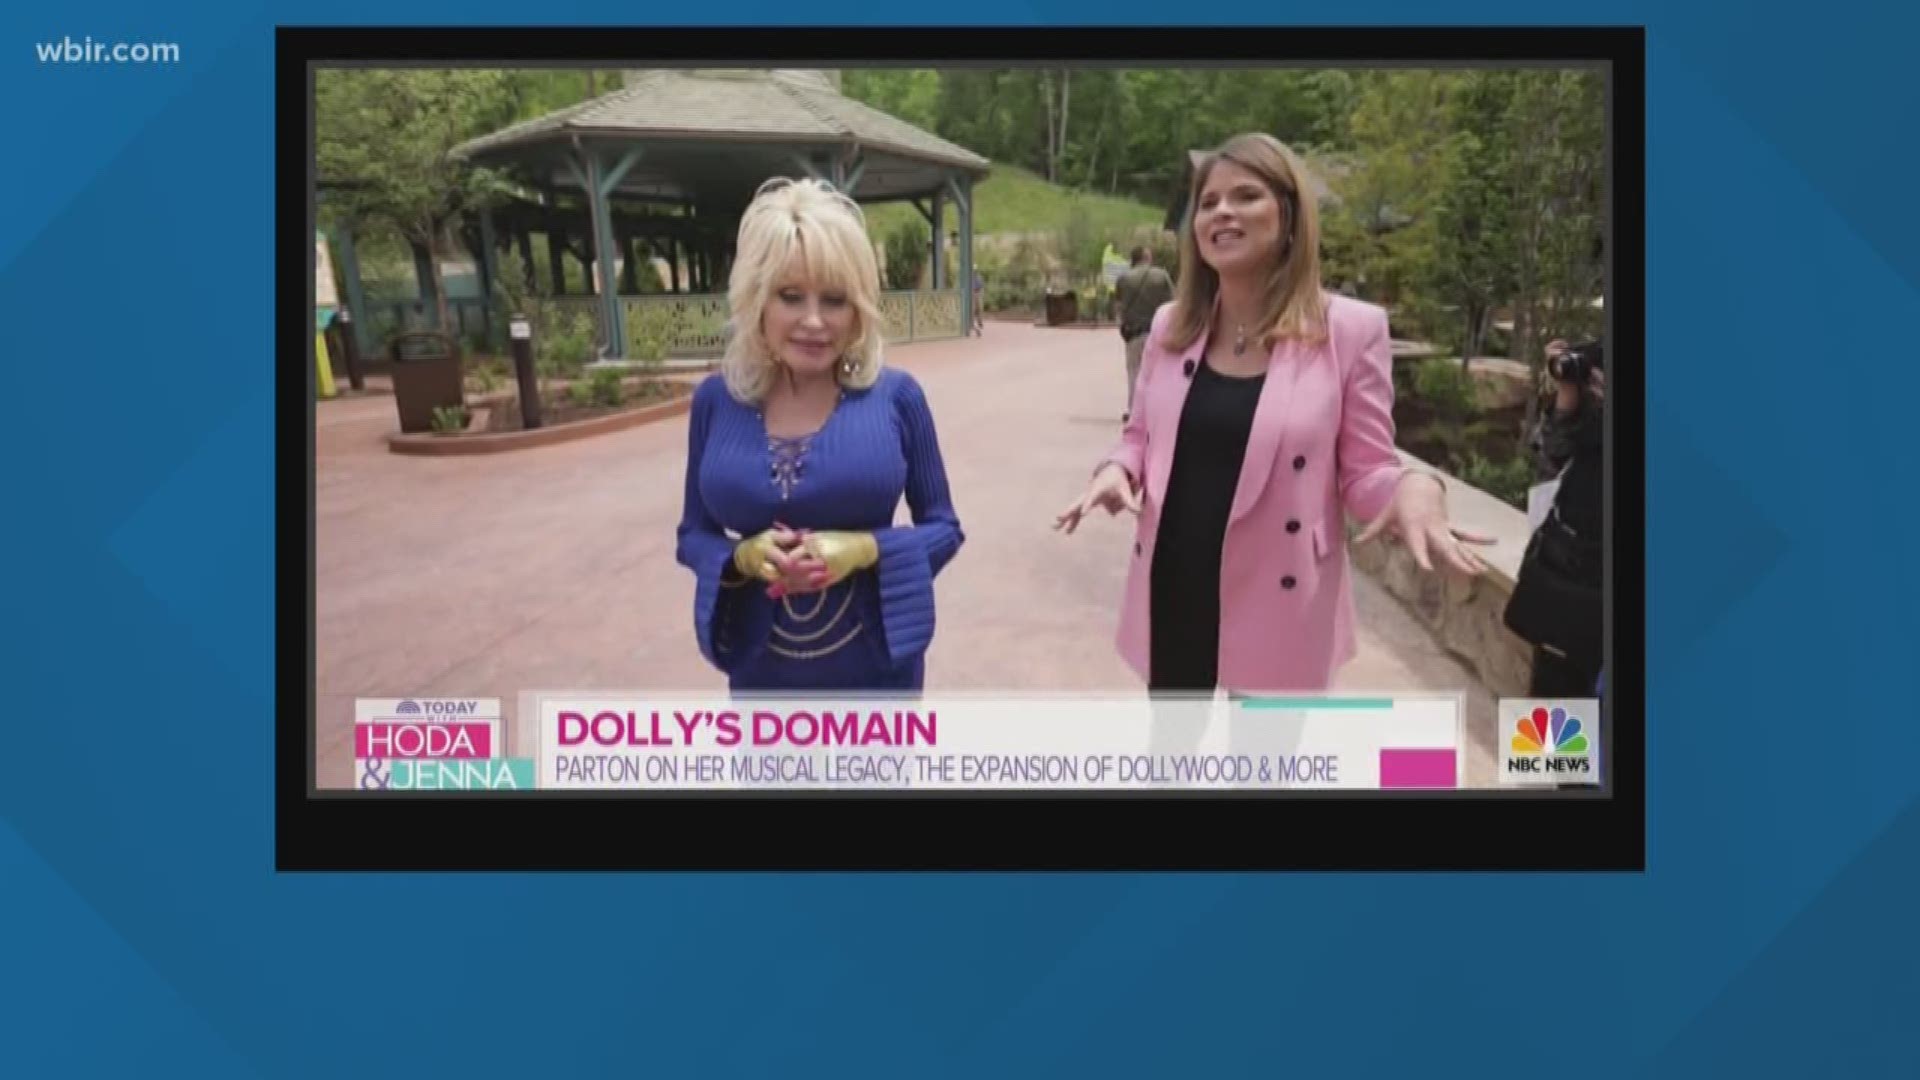 Jenna Bush Hager interviewed the East Tennessee icon in the middle of the new Wildwood Grove expansion at Dollywood.